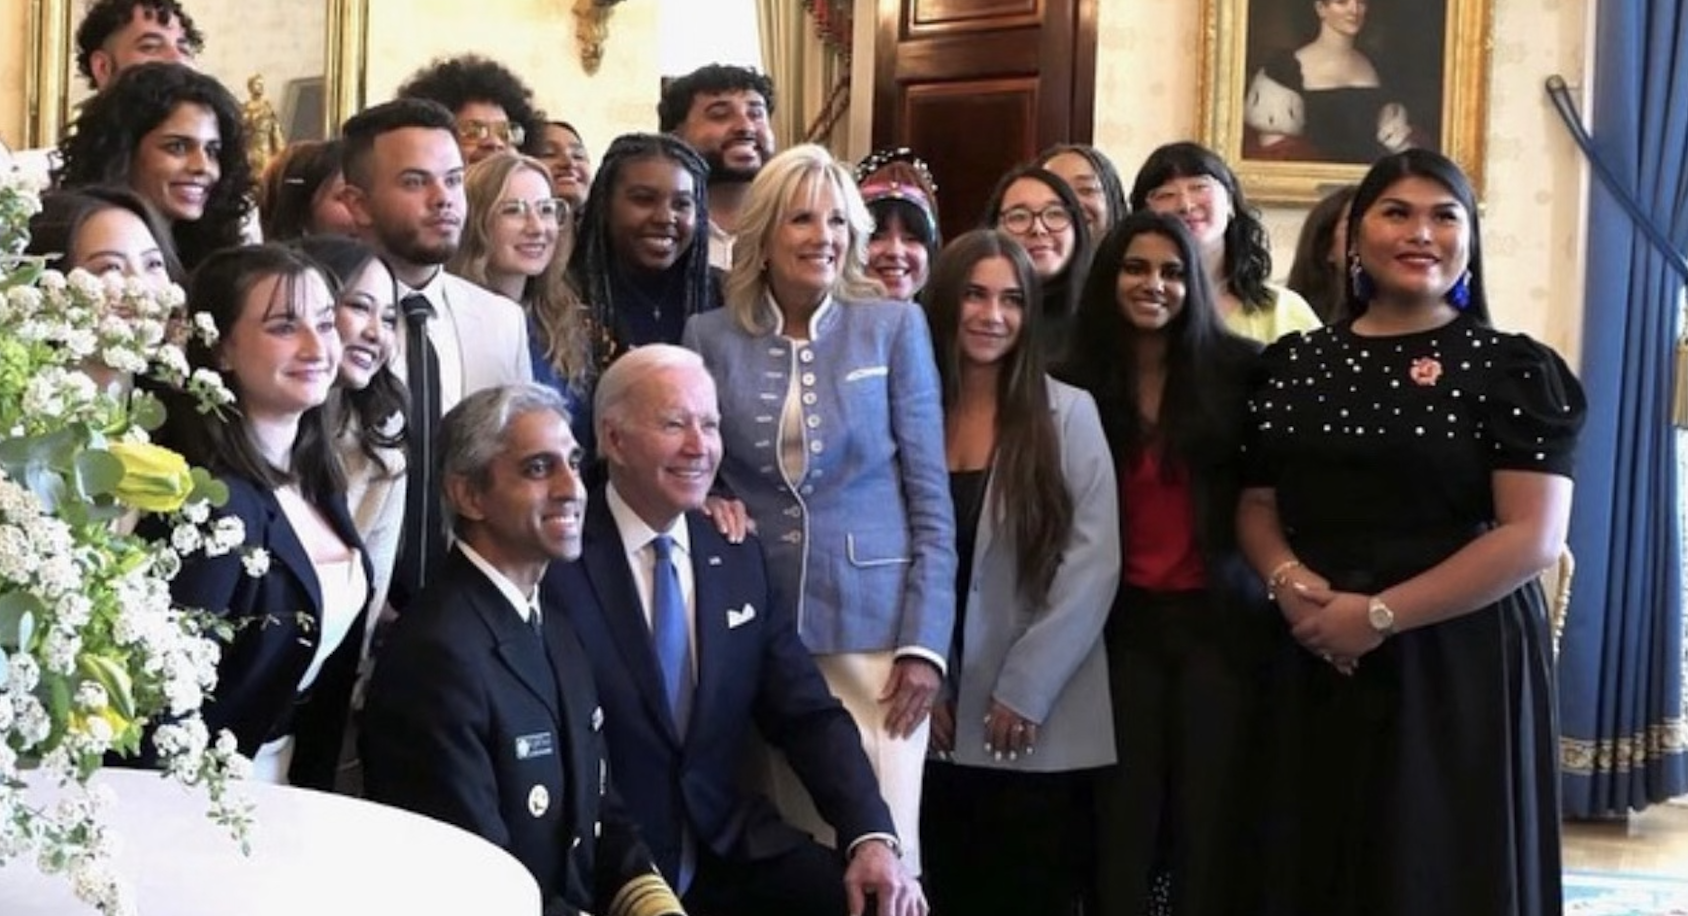 A group of young activists taking a picture with First Lady Dr Jill Biden, Surgeon General Dr Murthy and the President of the United States Joe Biden